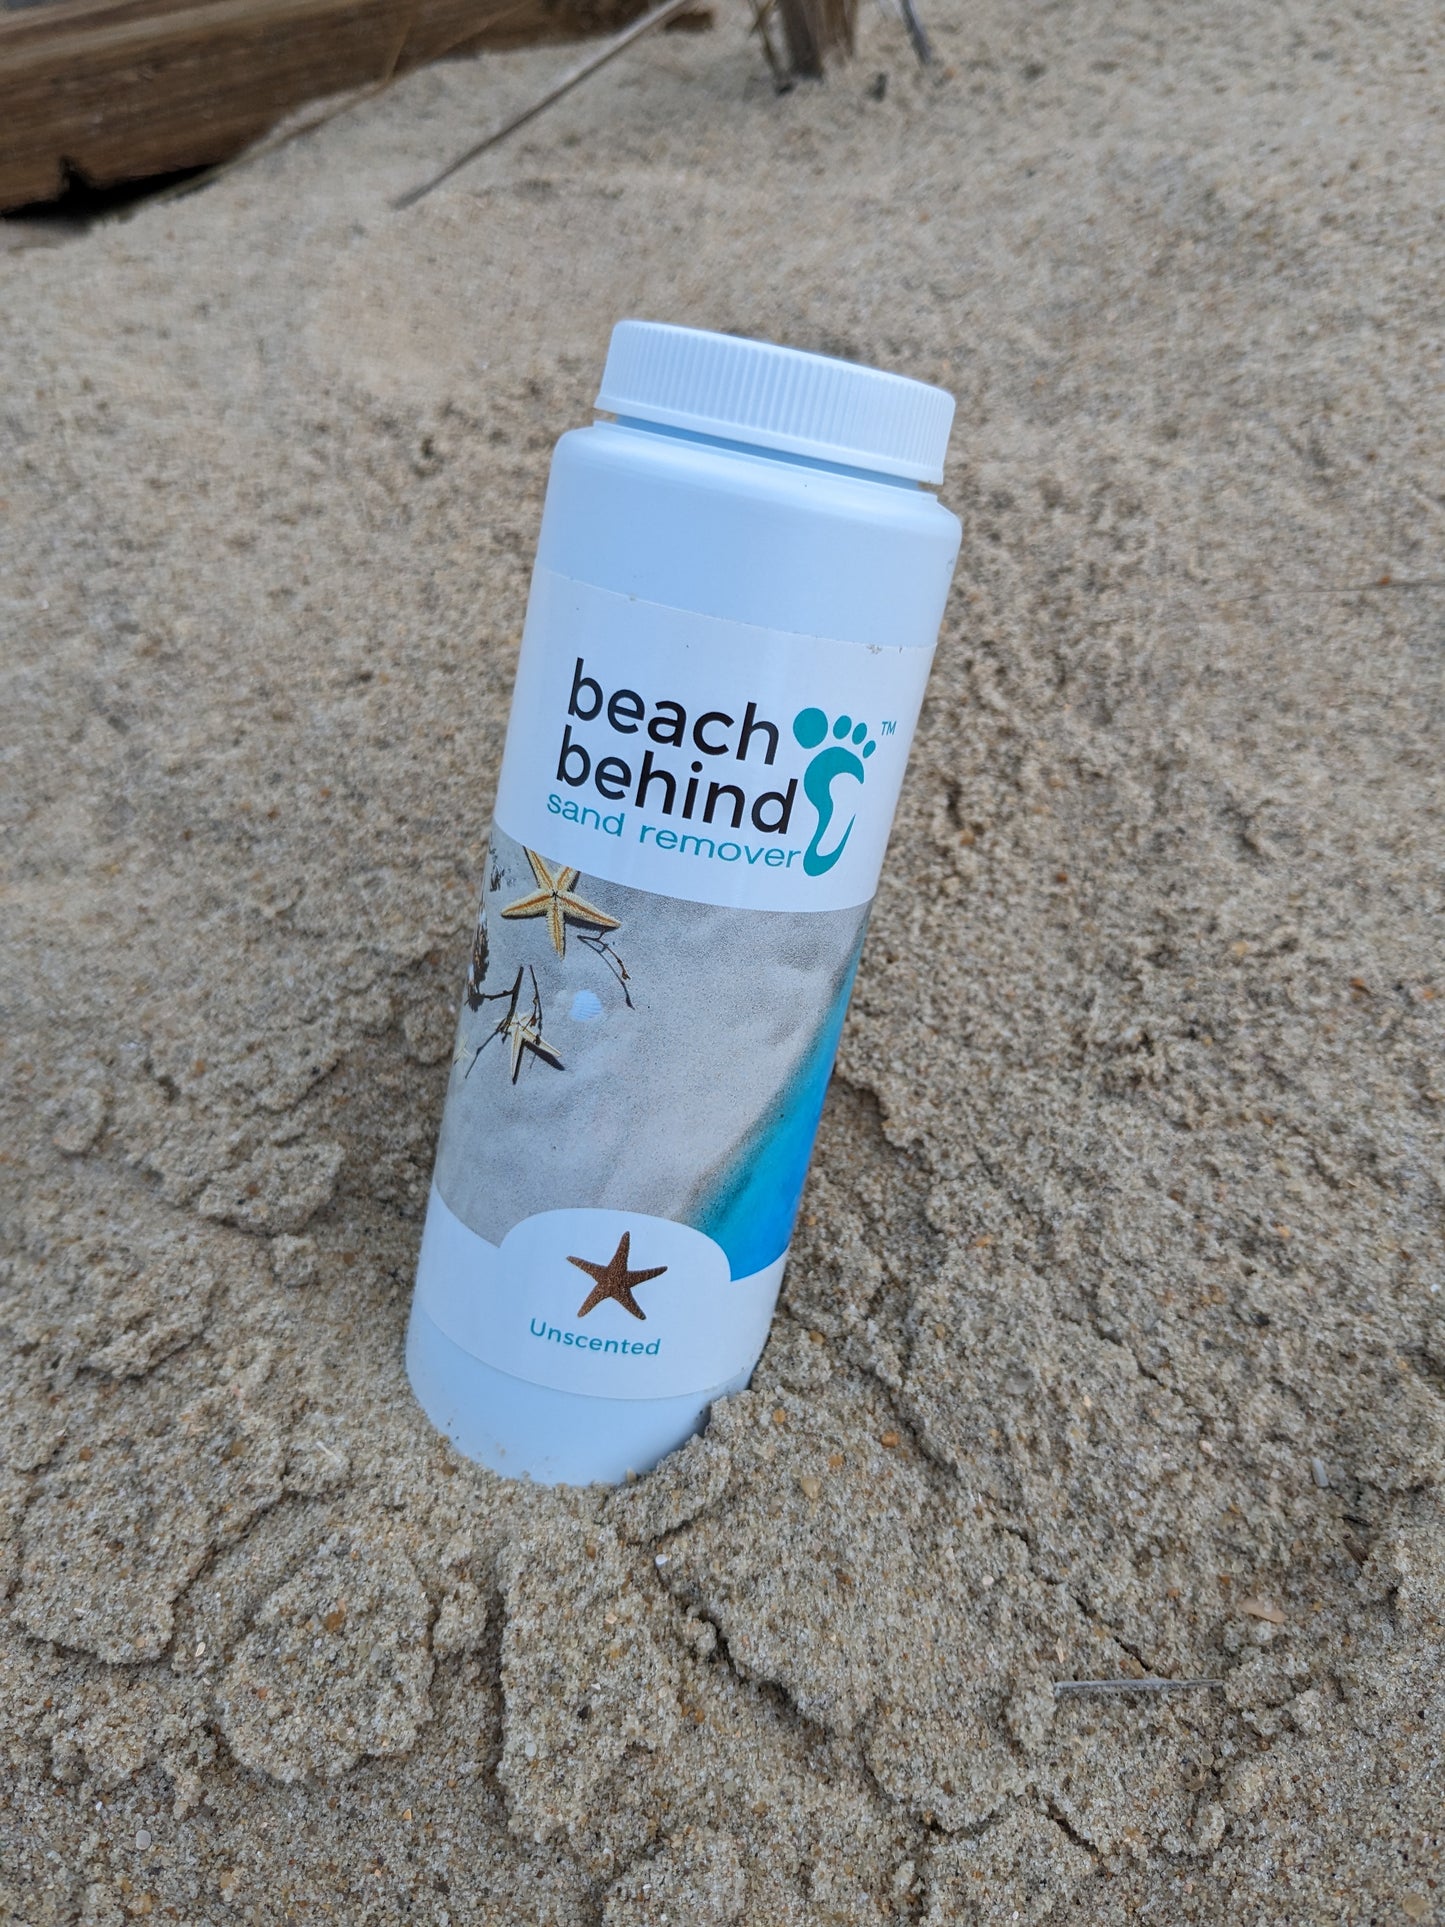 Beach with a bottle of beach sand remover